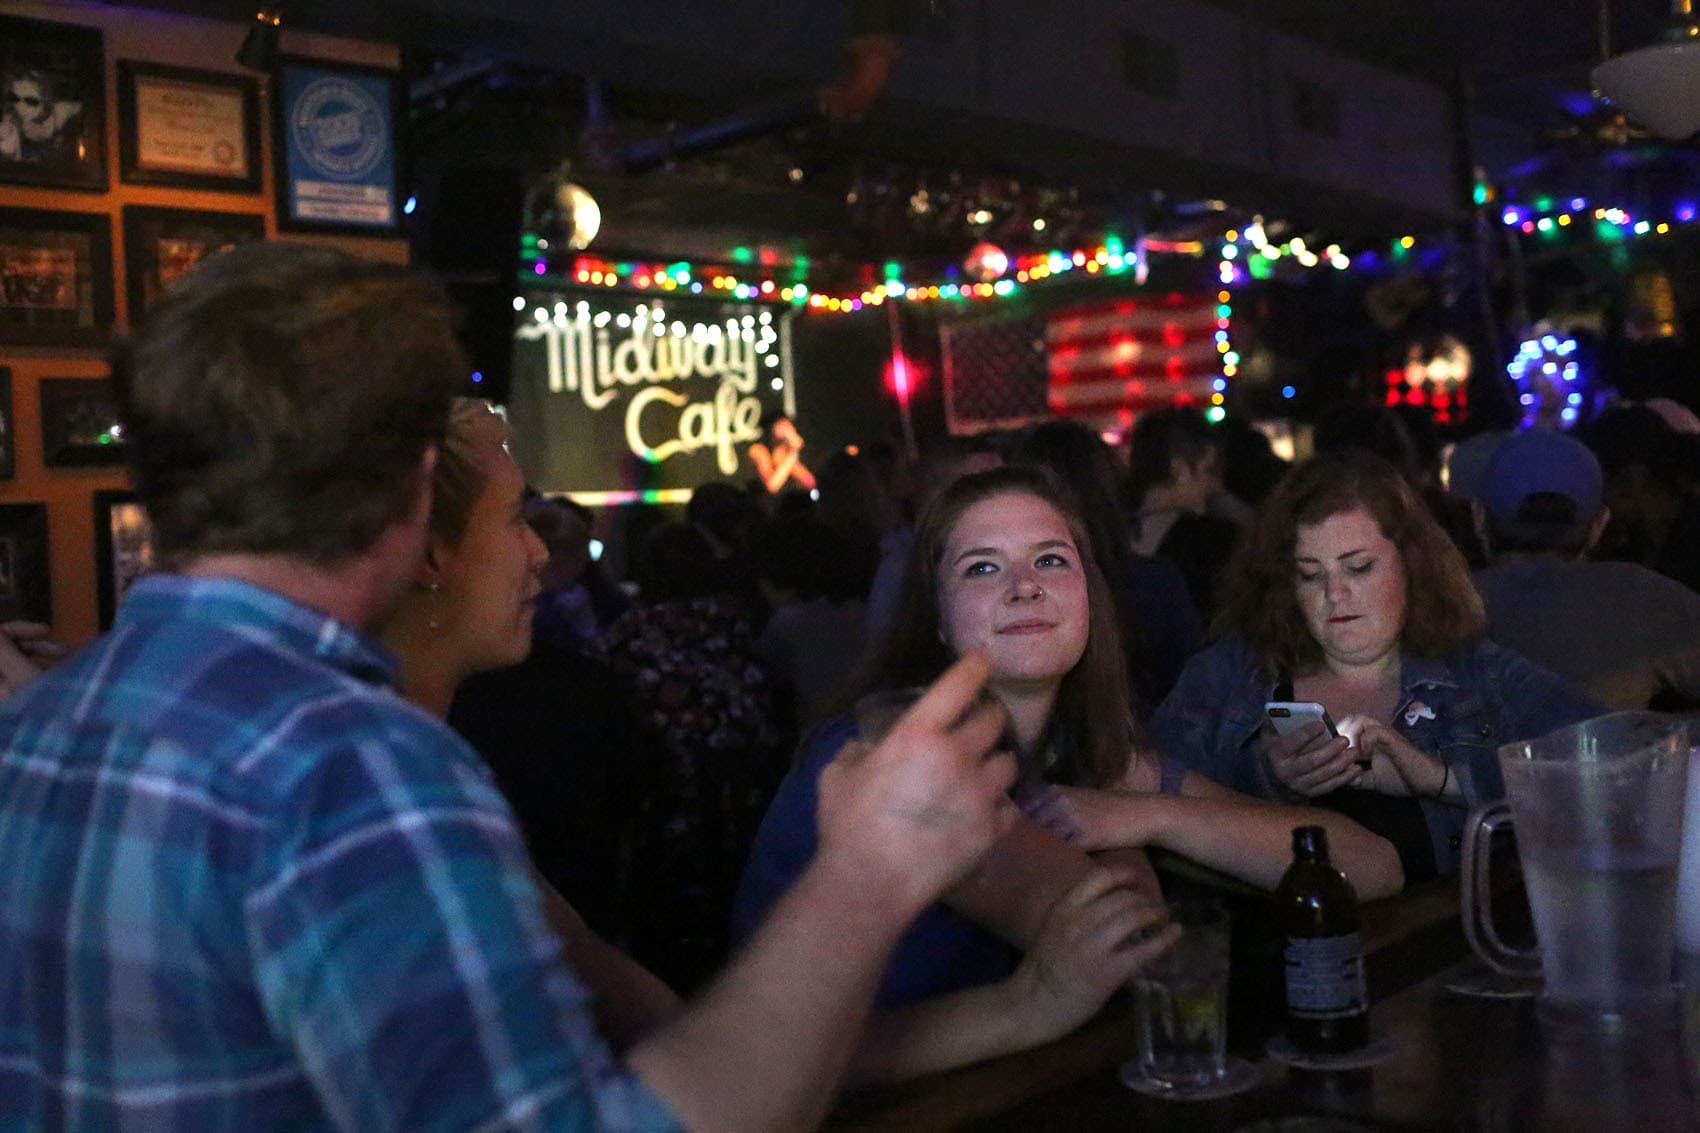 People sit at the Midway Cafe's bar. (Hadley Green for WBUR)